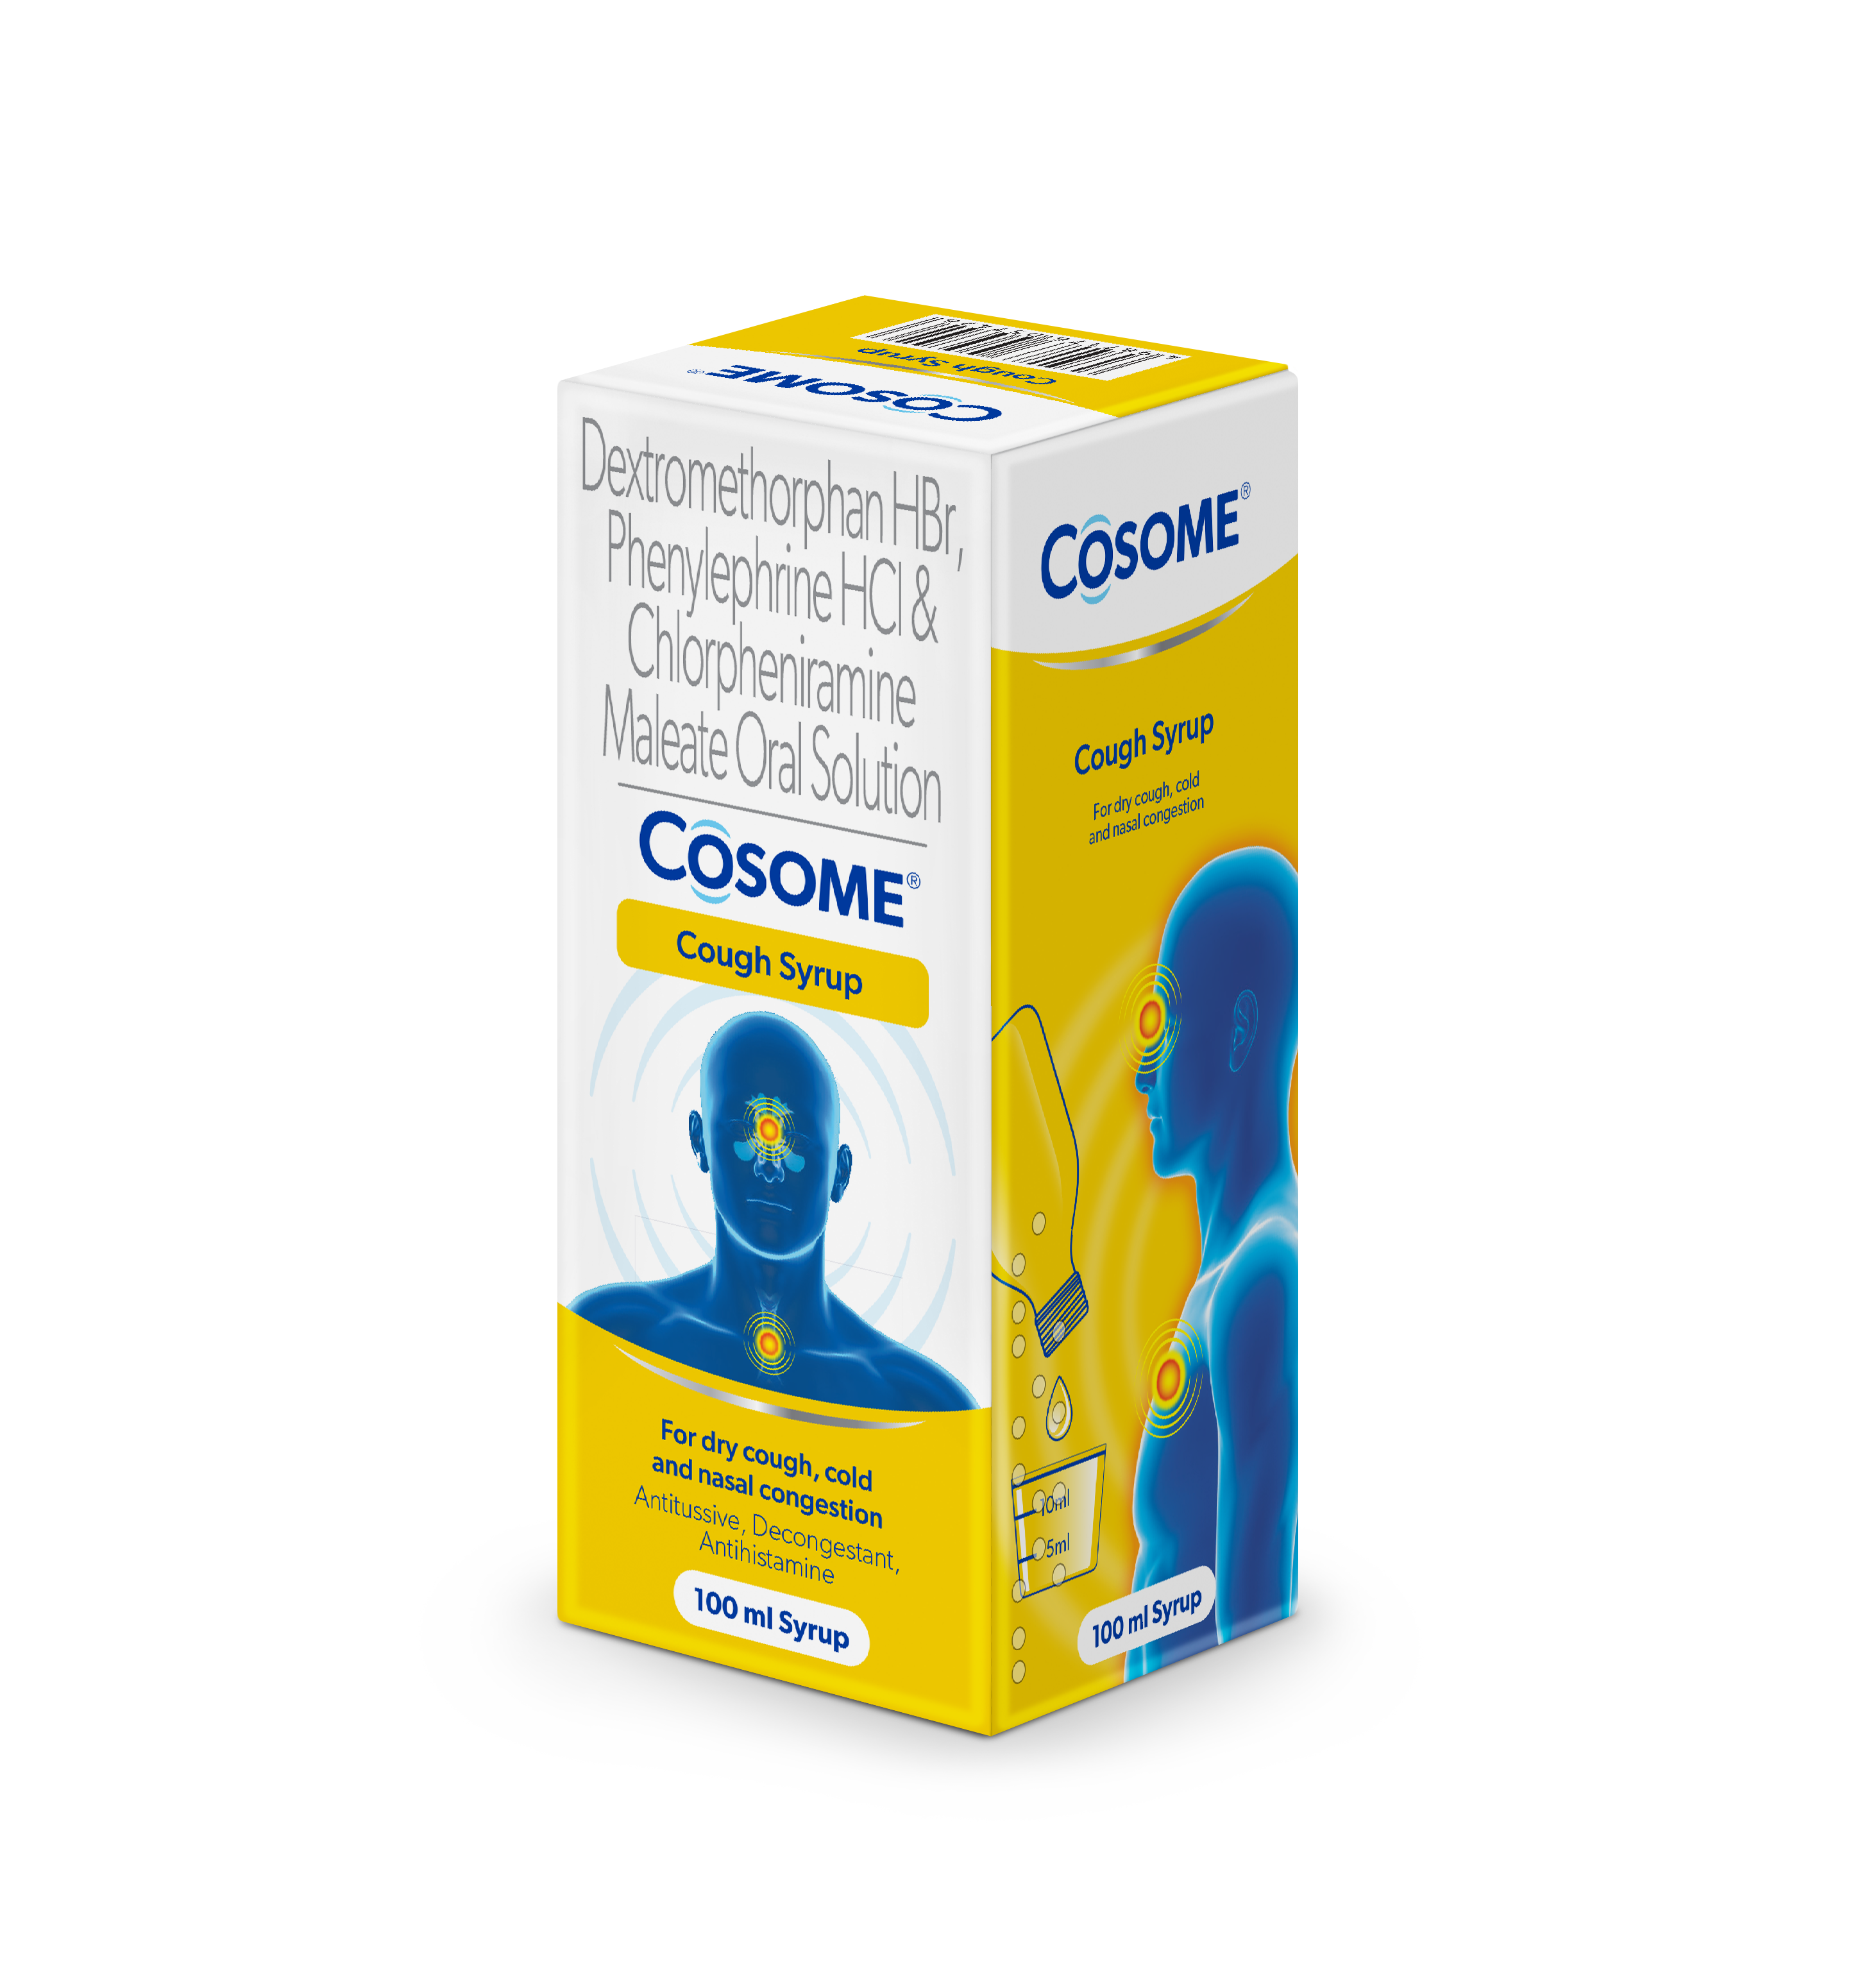 Cosome Cough Syrup Image